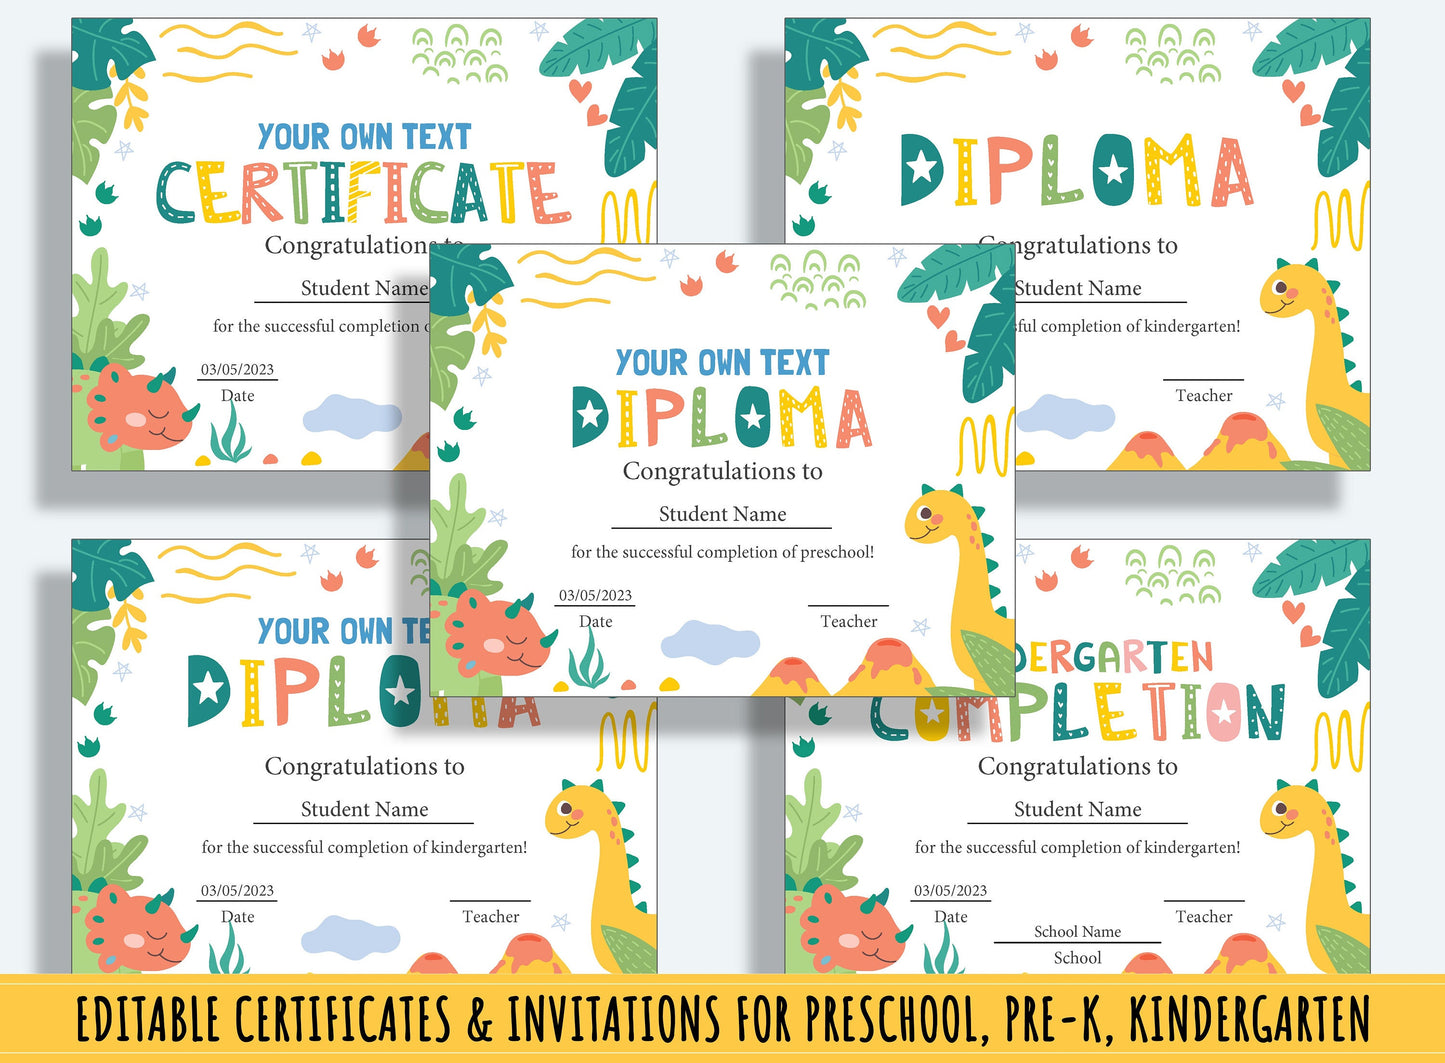 37 Pages of Editable Diplomas, Certificates, and Invitations for Preschool and Kindergarten: Customize Your Own Designs, Instant Download